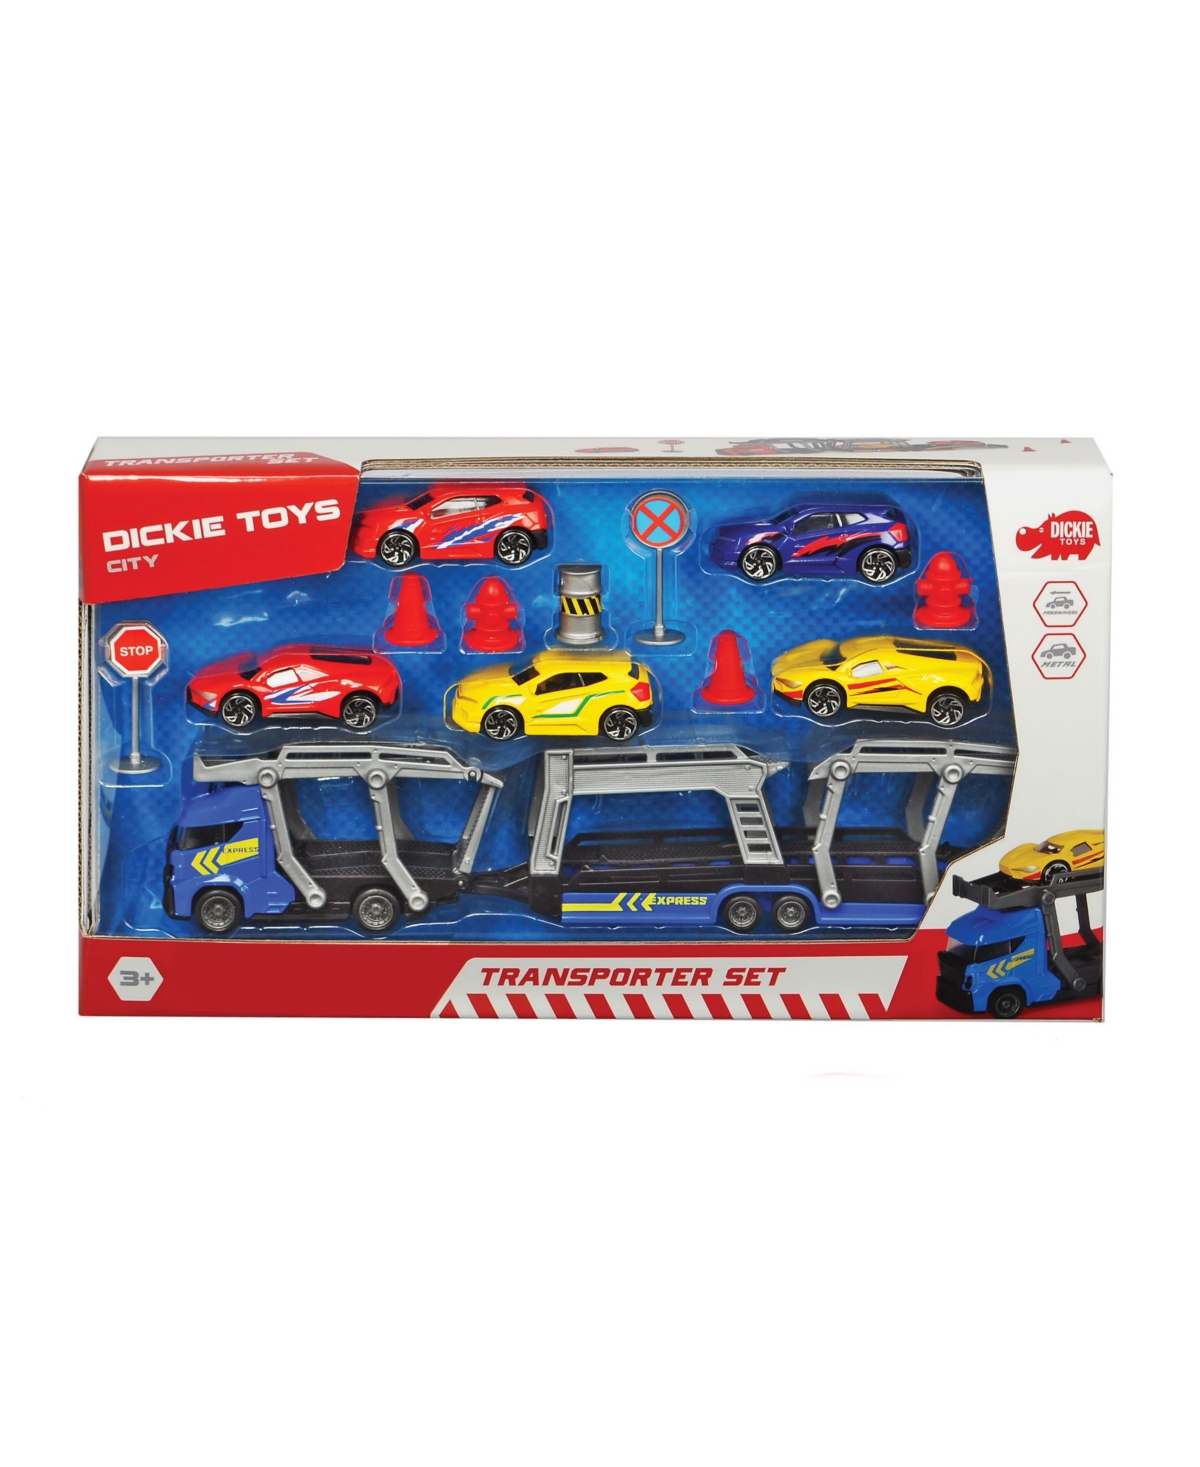 Shop Dickie Toys Hk Ltd Dickie Toys Transporter Set With 5 Die-cast Cars In Multi